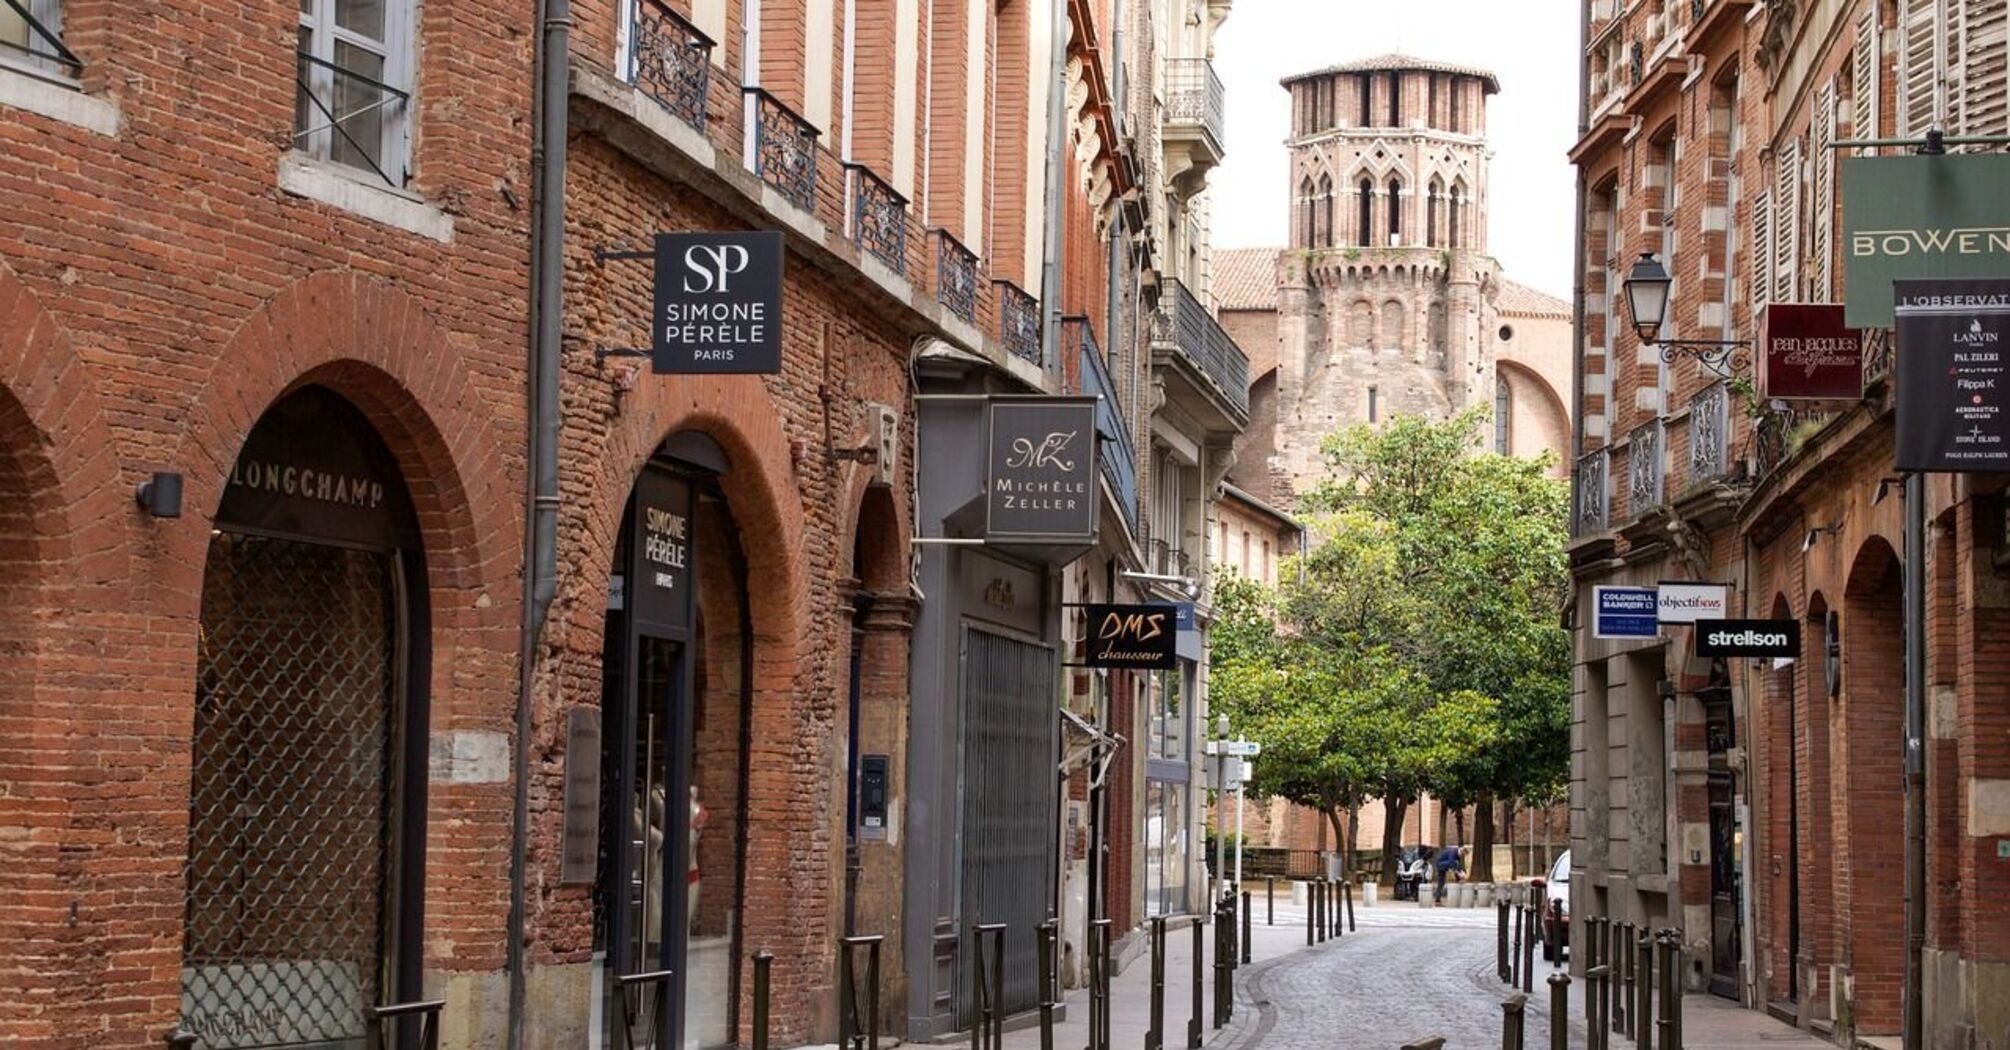 The French have identified the most hospitable city in the country, and it's not Paris or Nice